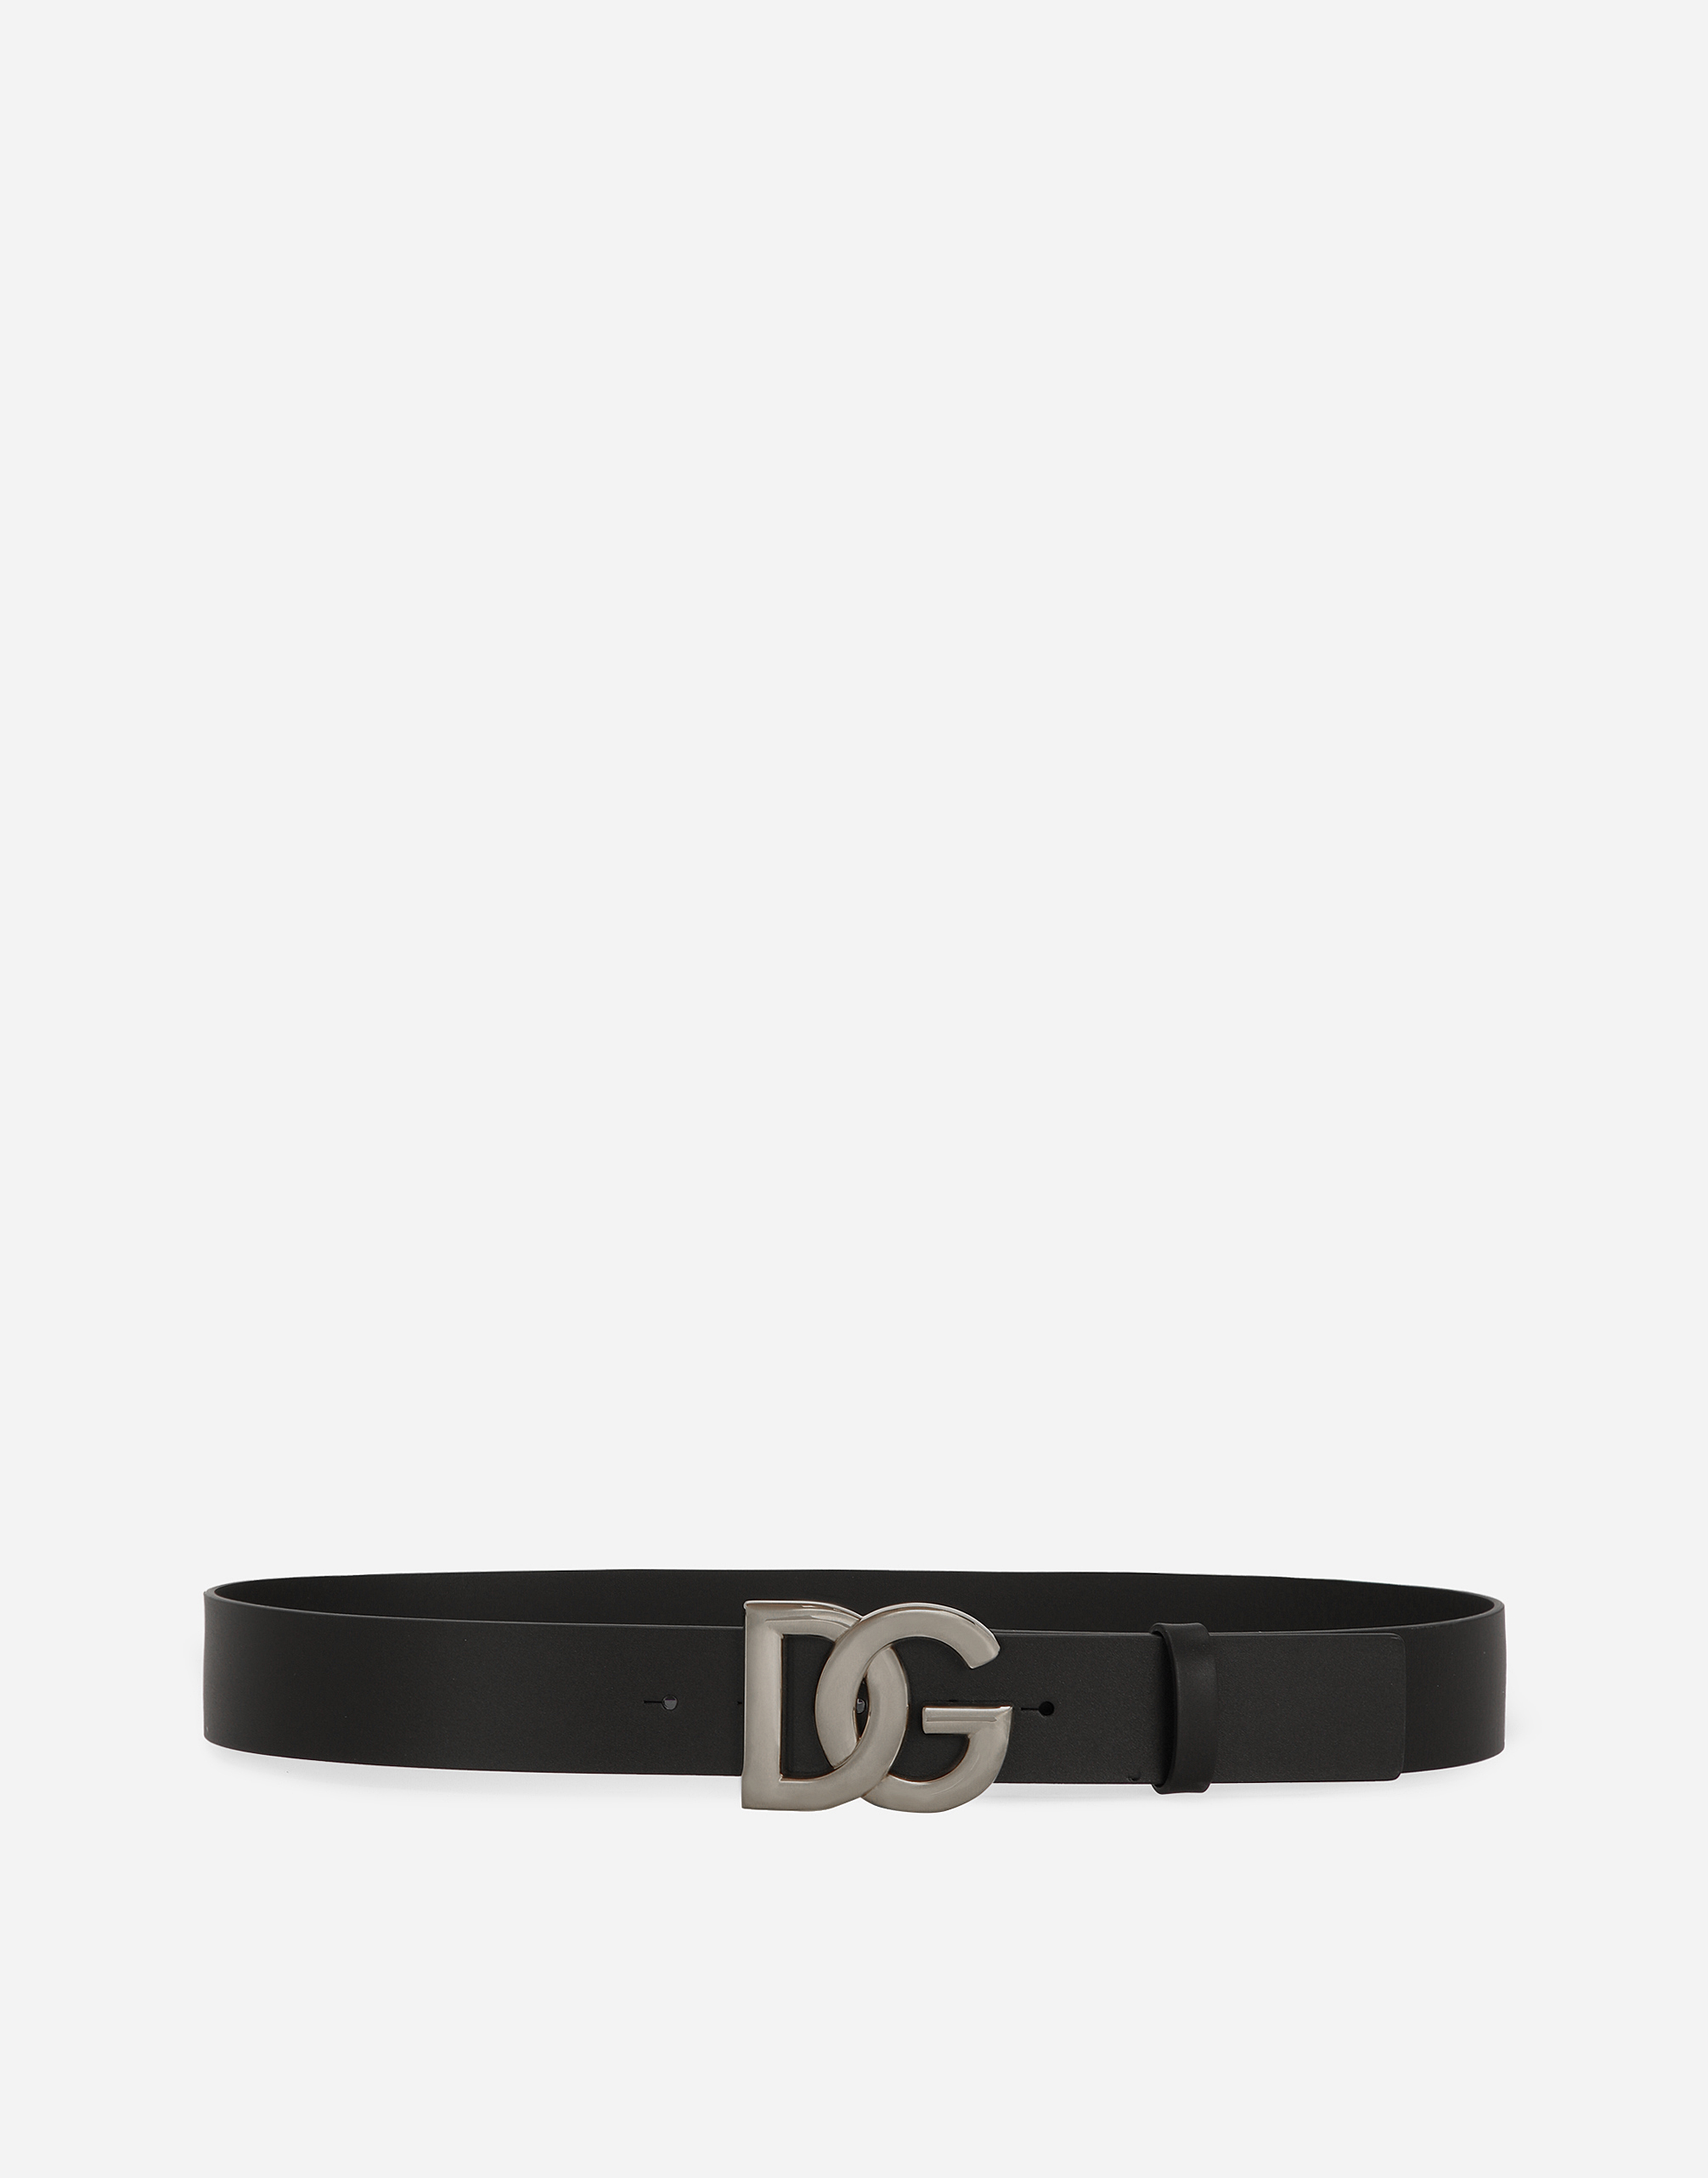 Lux leather belt with crossover DG logo buckle in Black for Men 